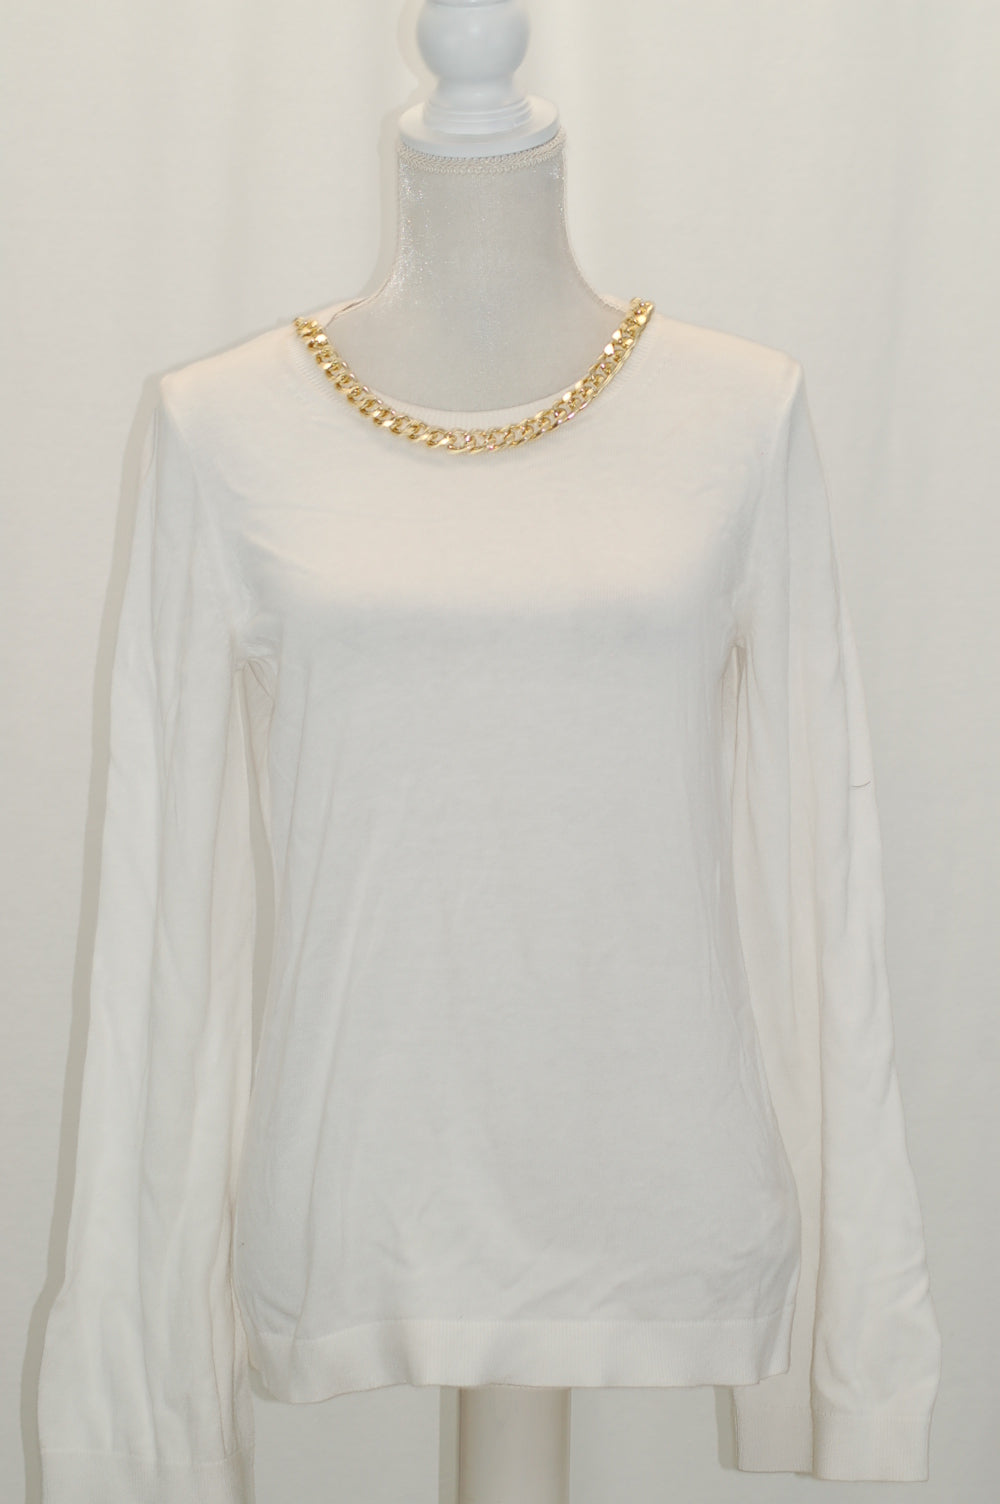 Michael Kors Chain-Embellished Sweater White M